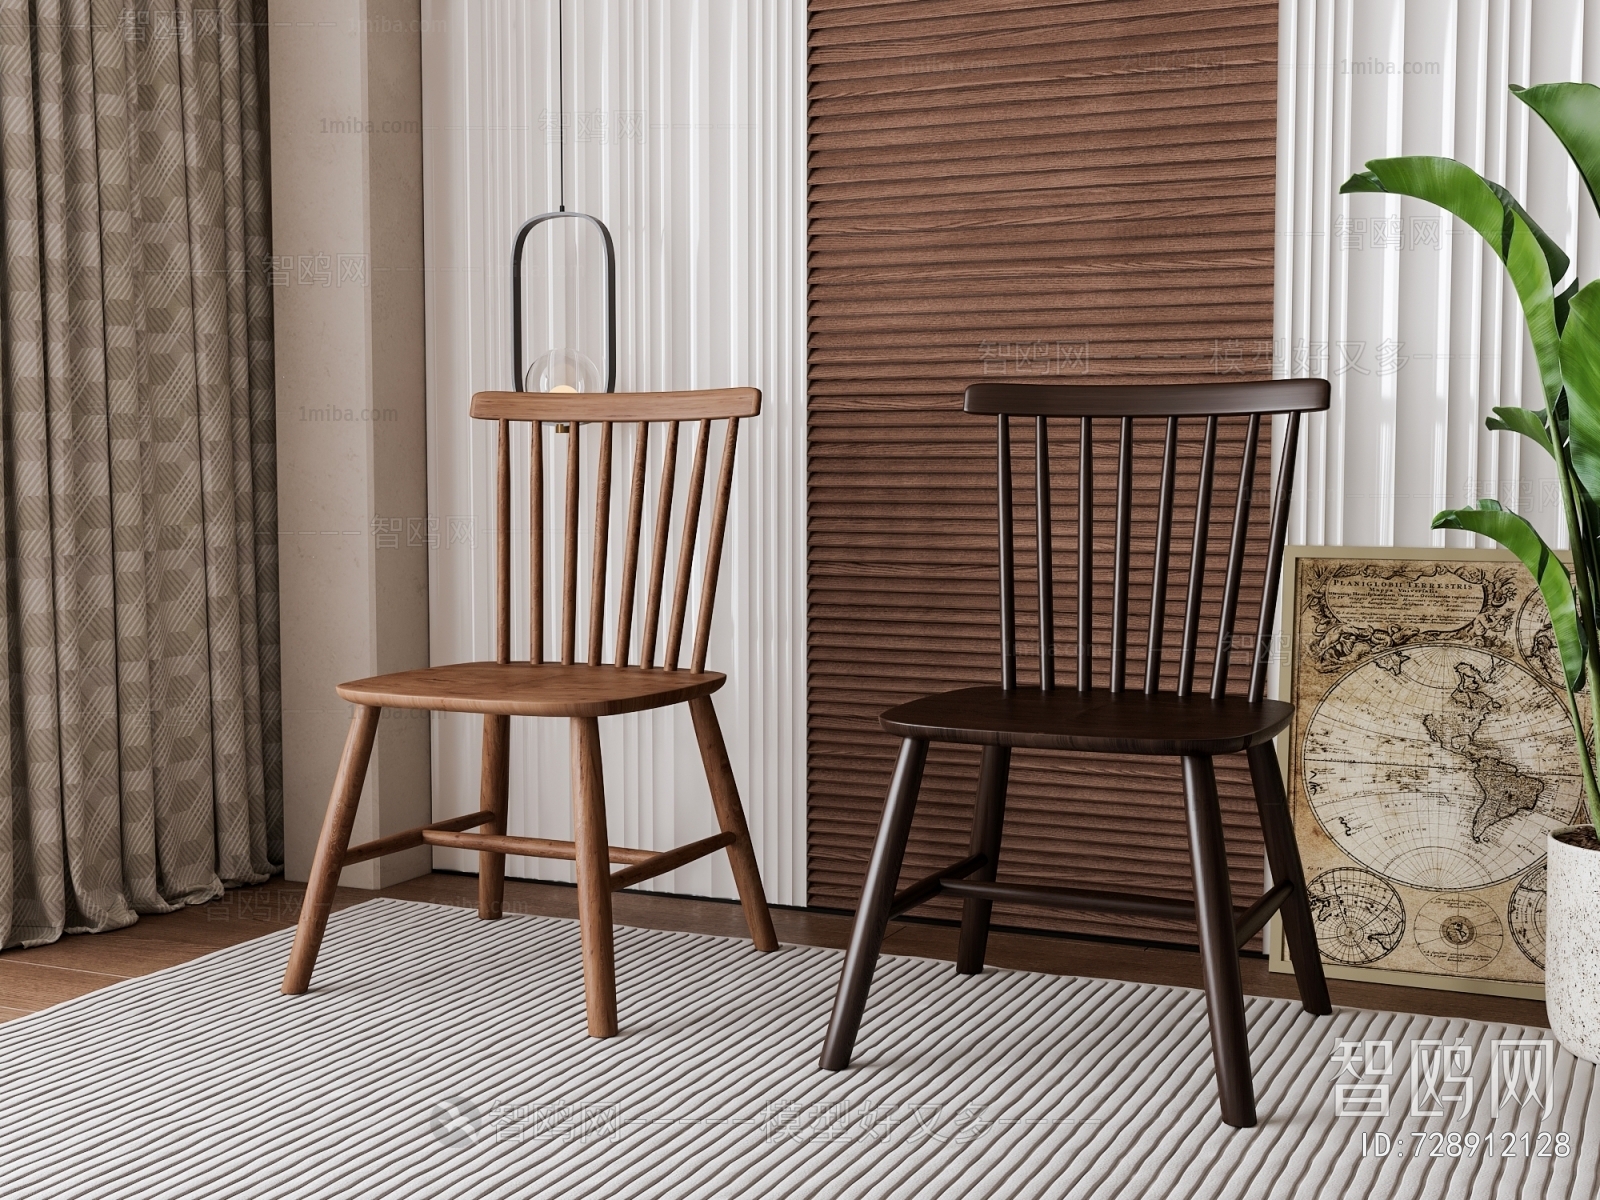 American Style Dining Chair